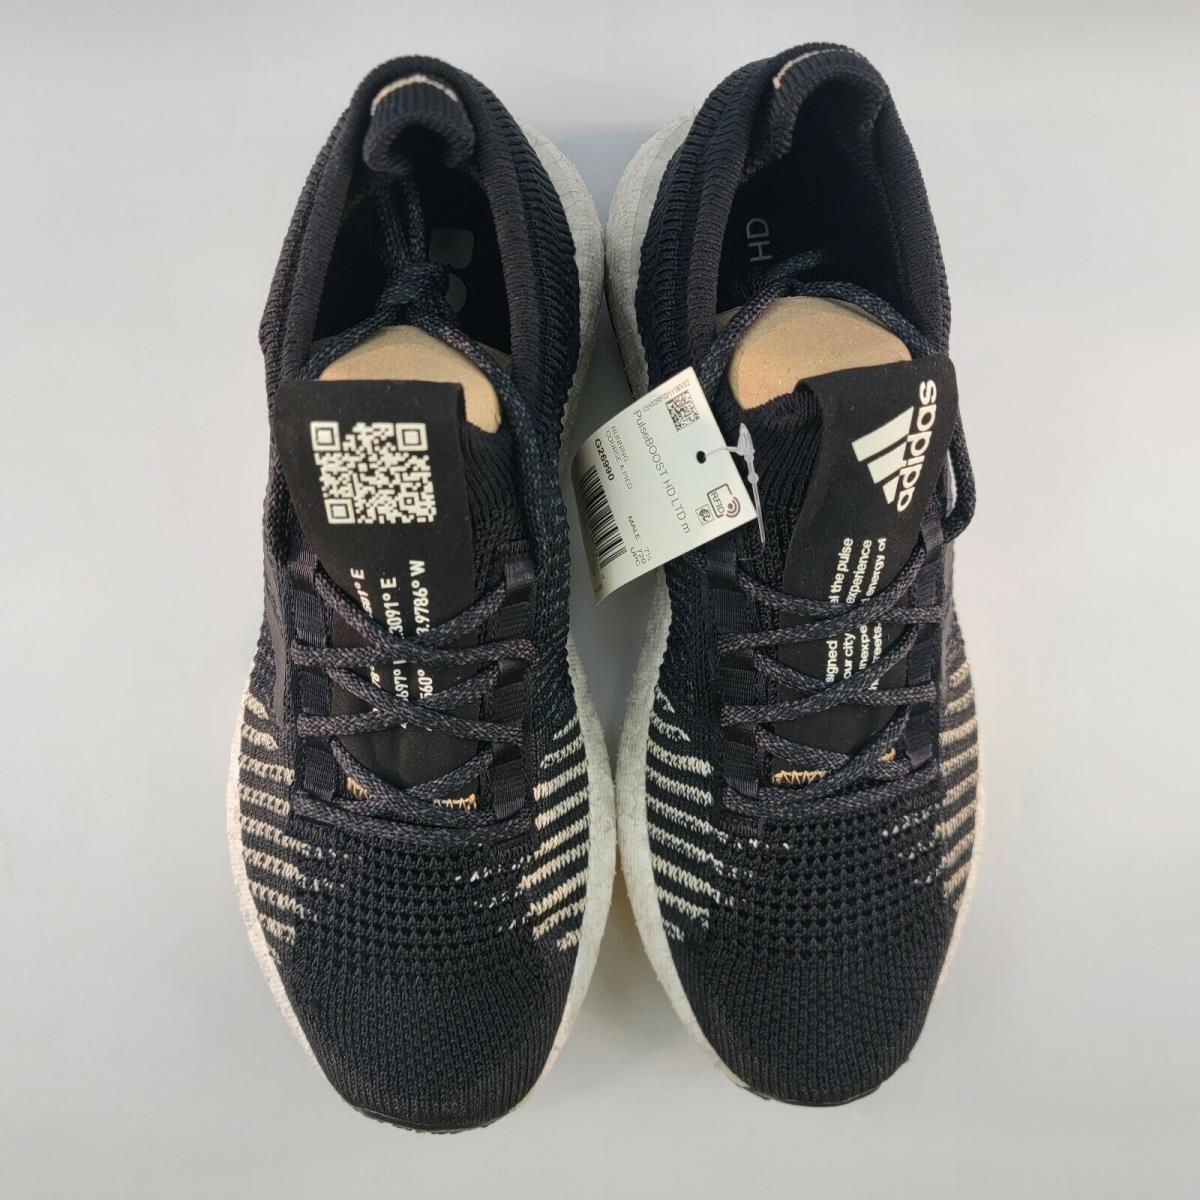 Adidas Mens Pulseboost HD Ltd Running Shoes Core Black White G26990 Size 8.5 | 192615185781 shoes PulseBoost - Black |